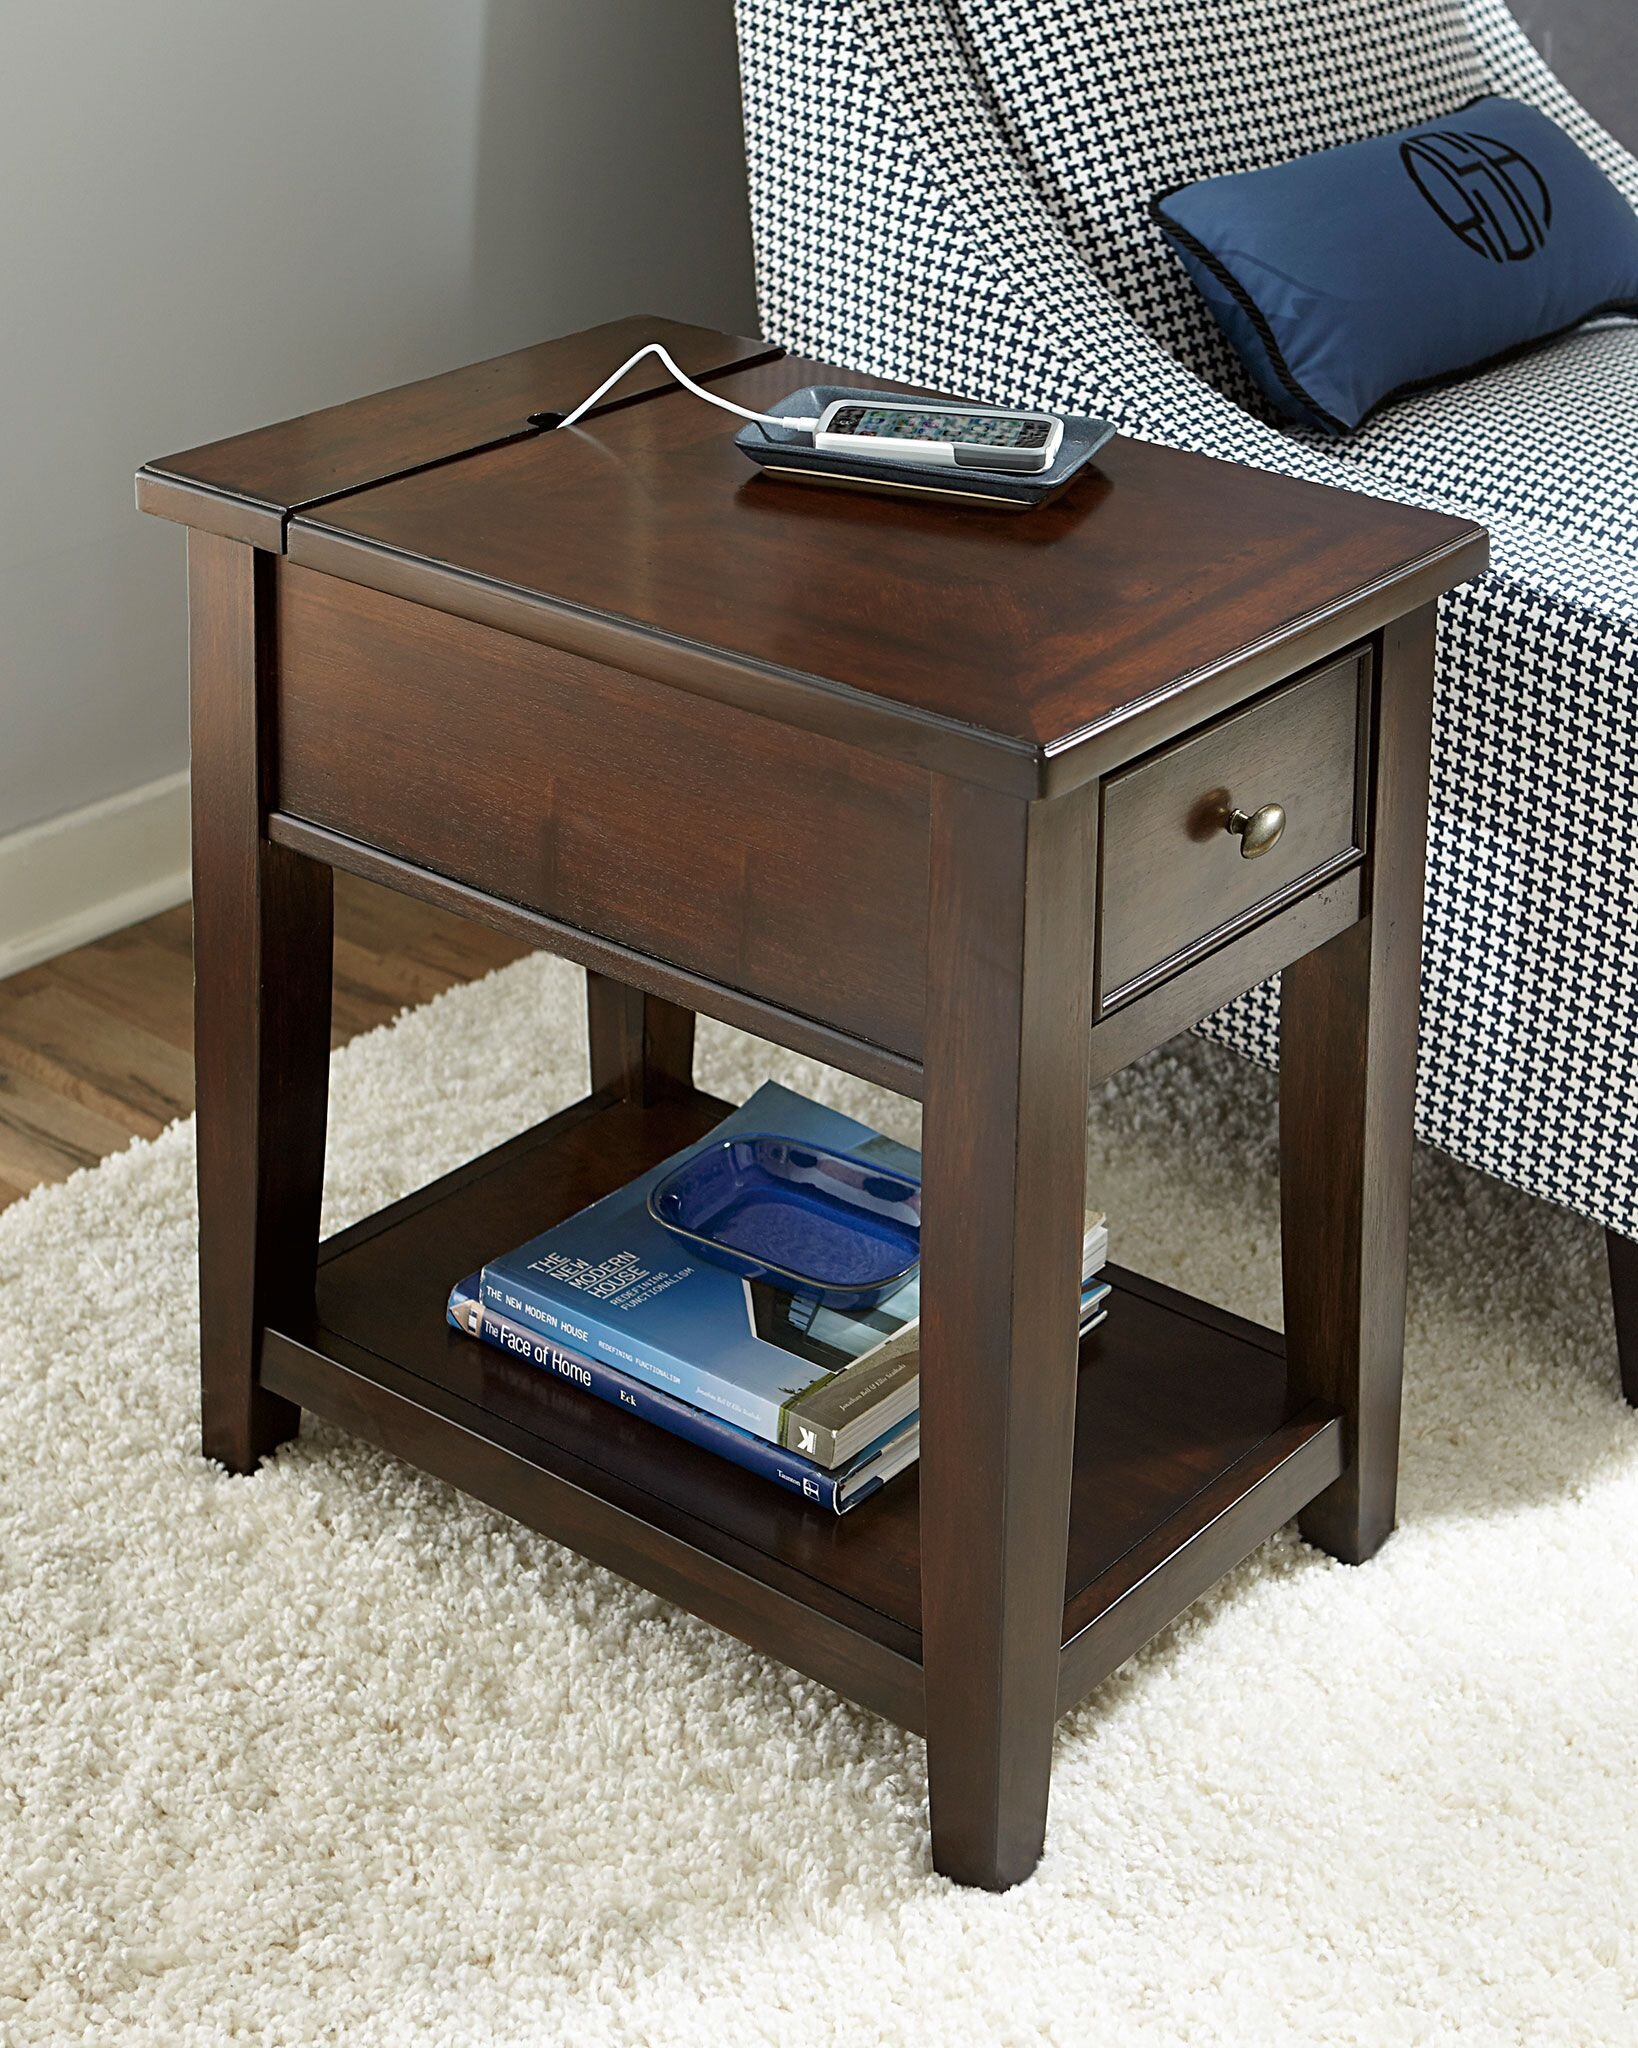 Chair Side Table With Outlets And Usb For Charging Electronics - Narrow